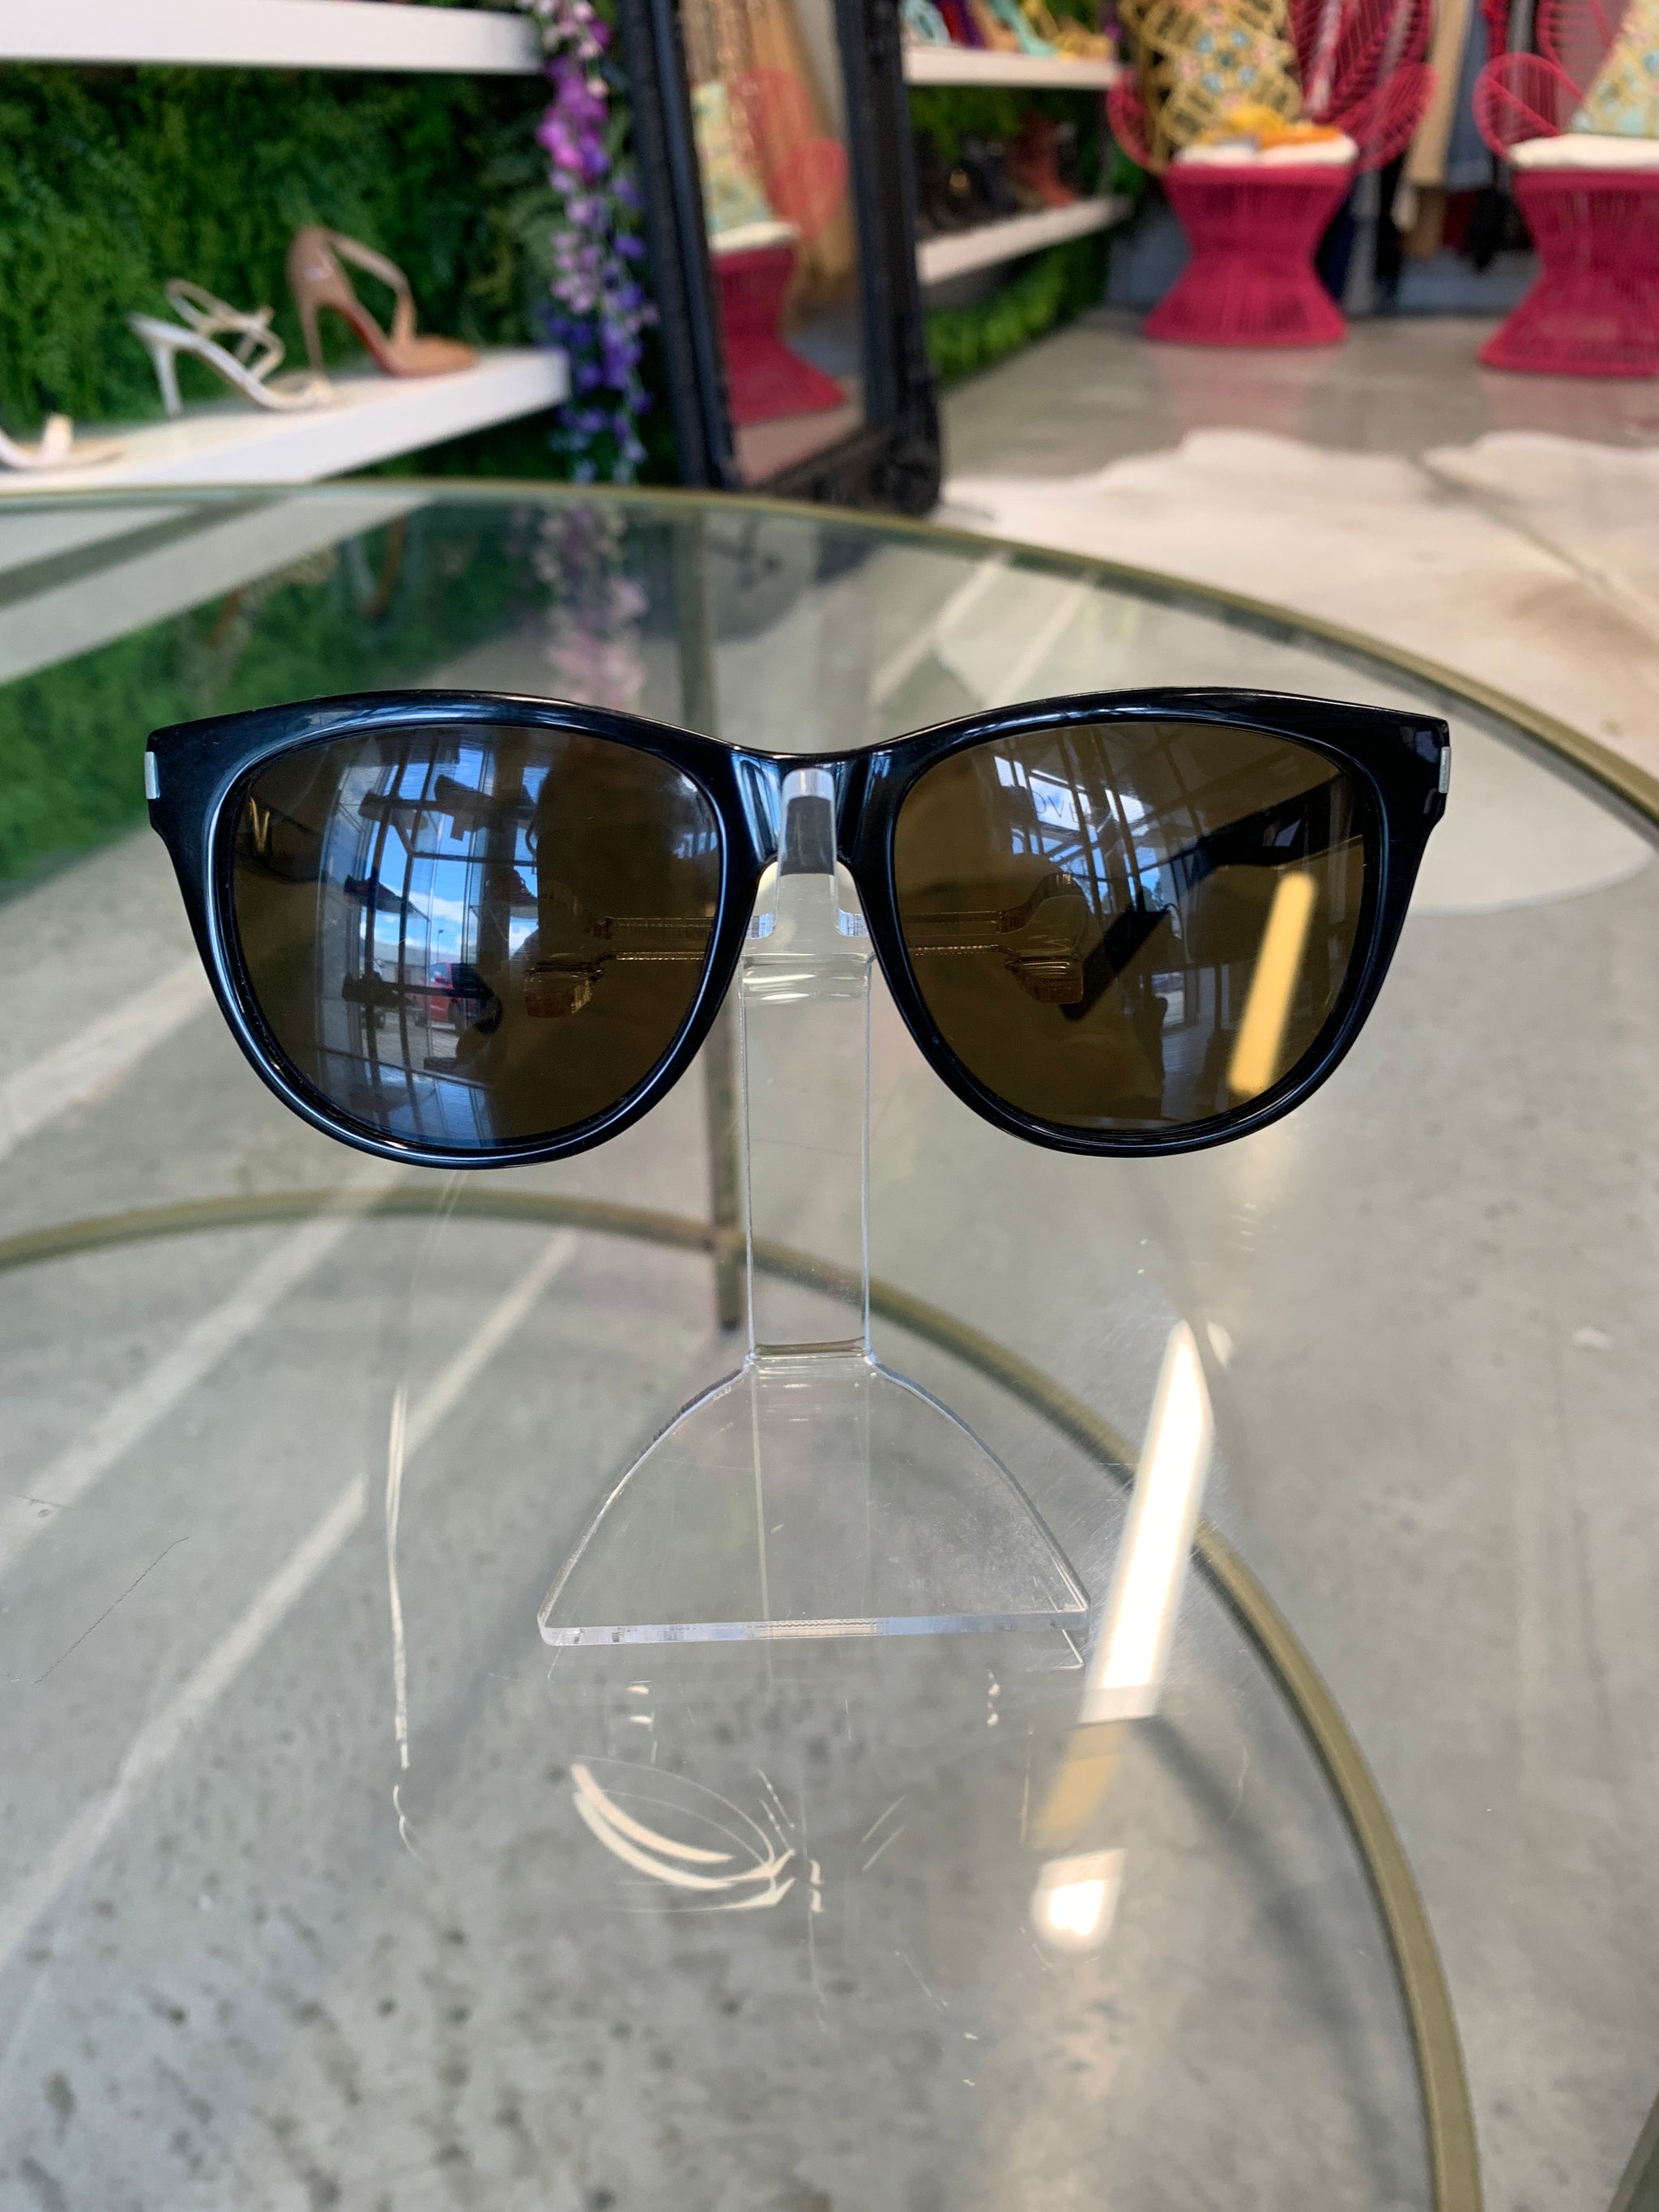 Buy Saint Laurent Sunglasses Classic 11 Silver w/Silver Mirror Lens 55mm  005 Classic11 at Amazon.in